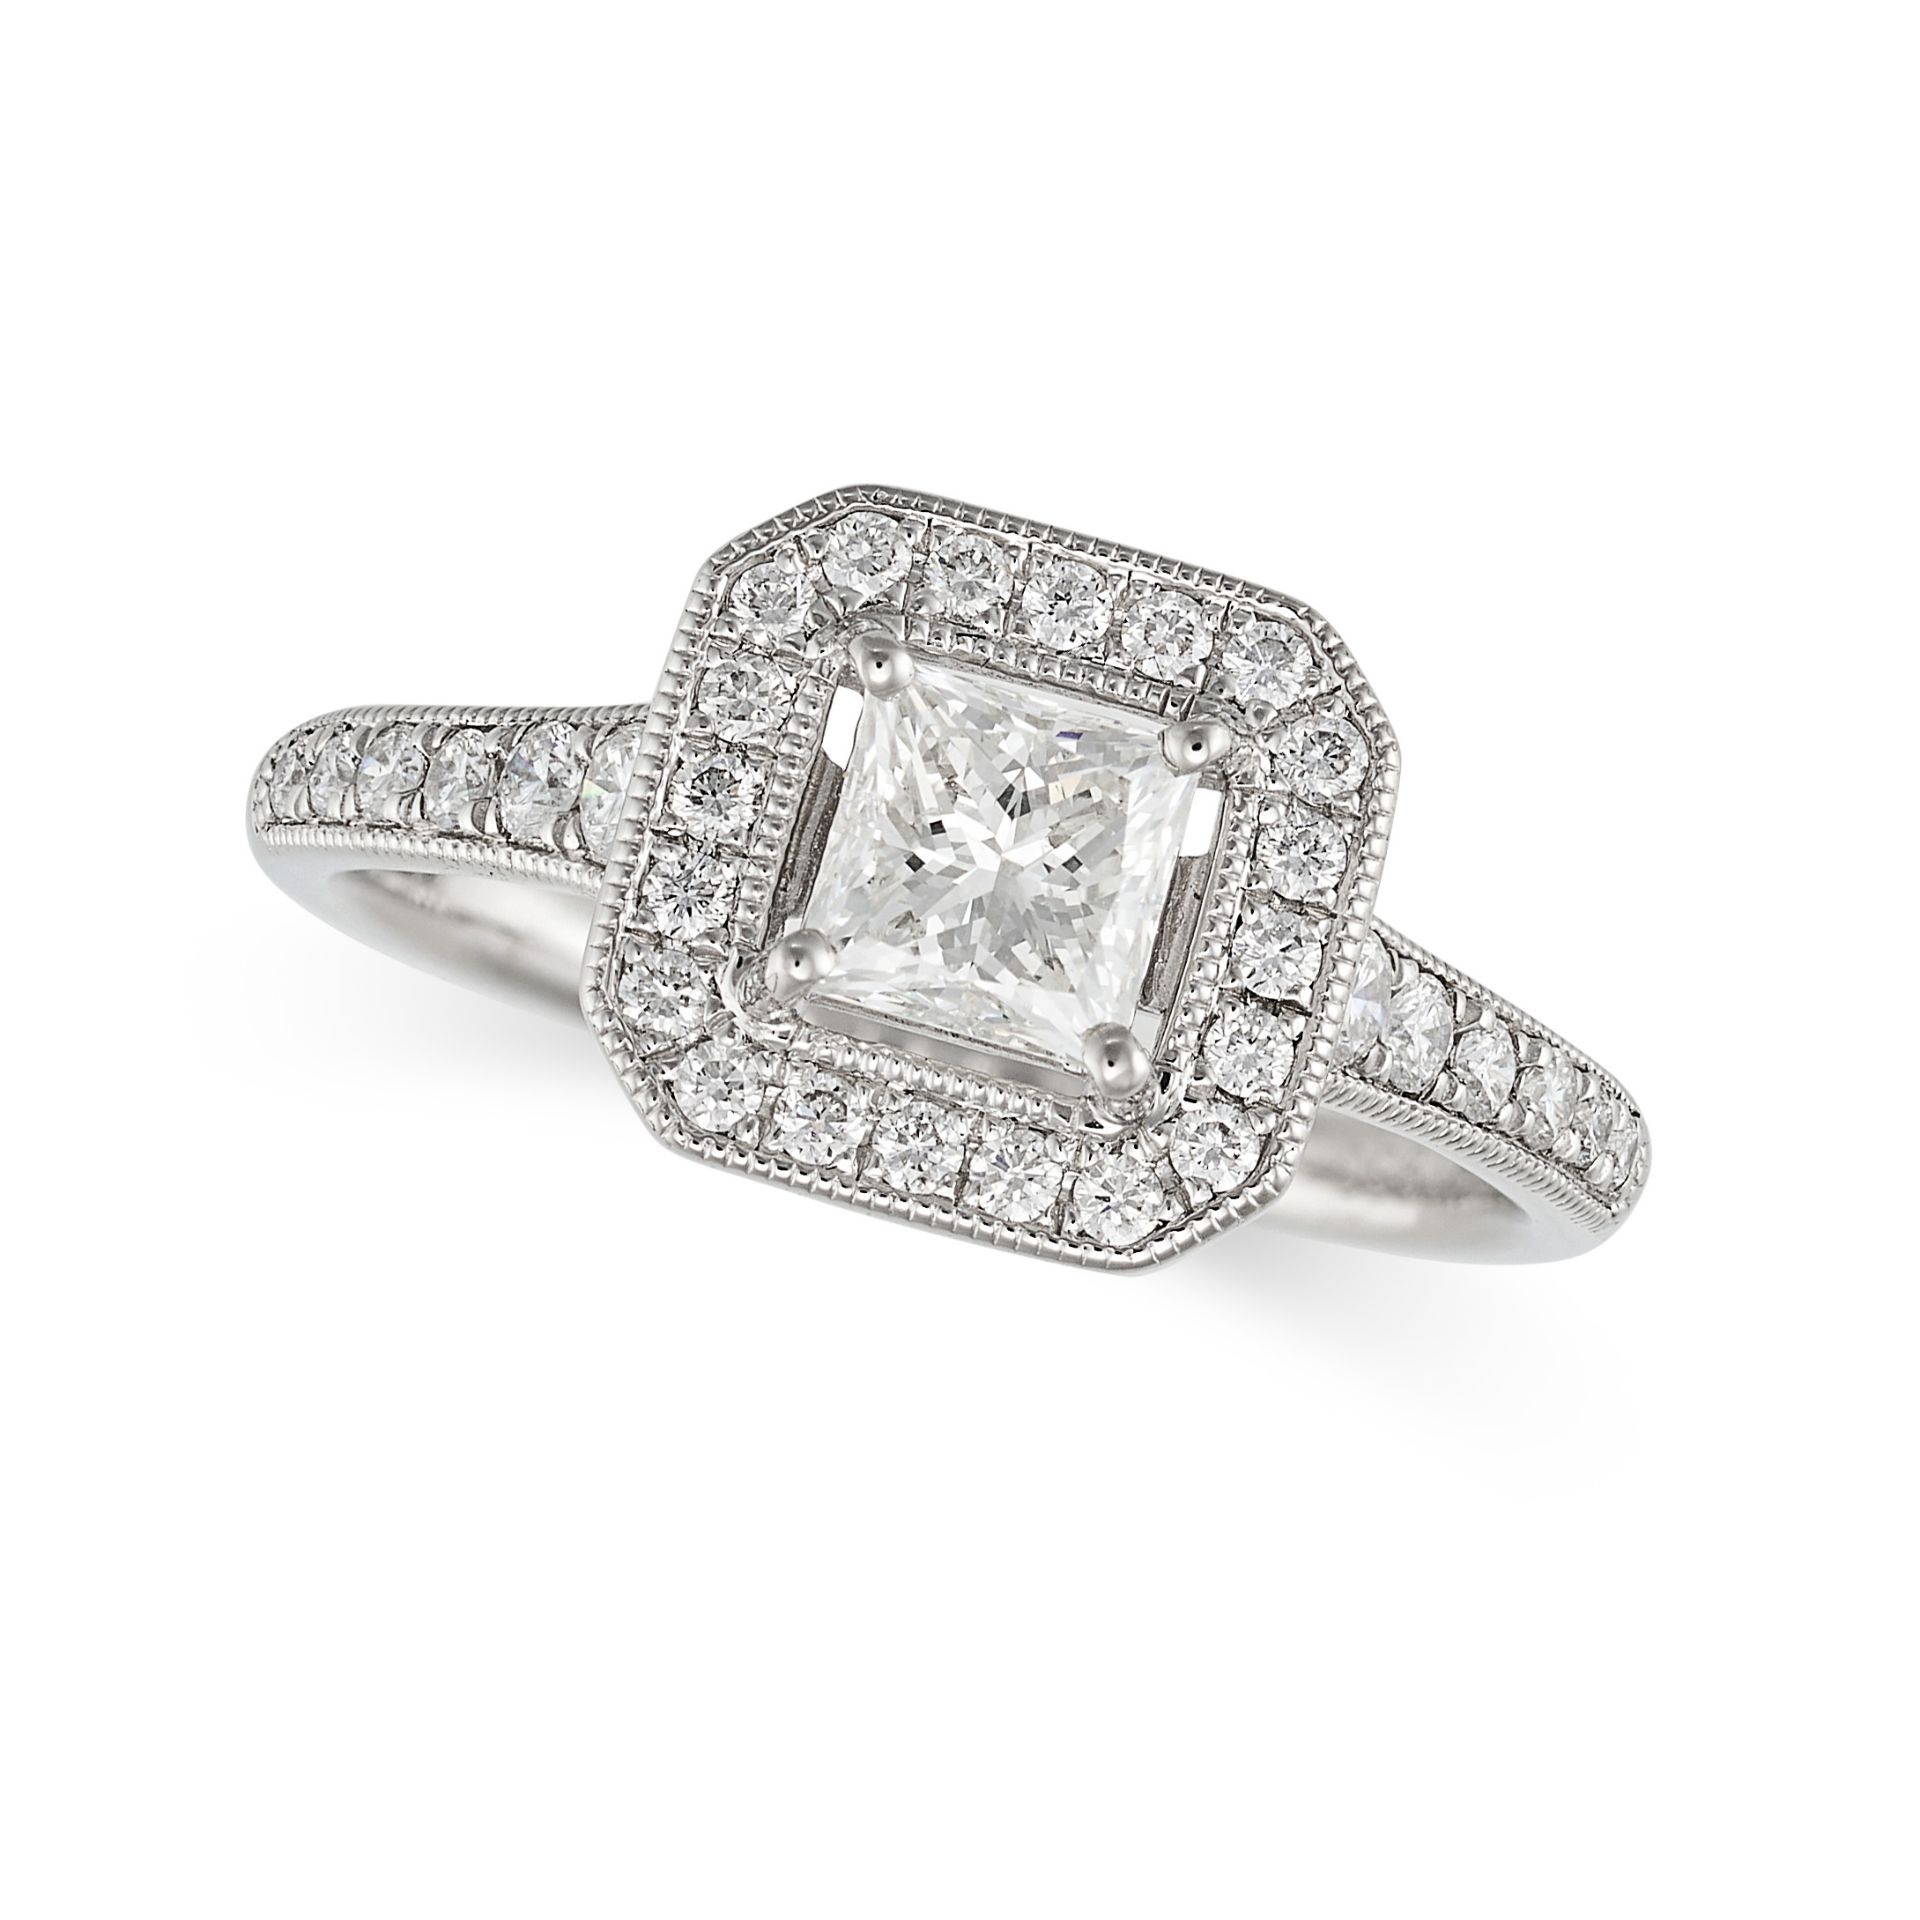 A DIAMOND SOLITAIRE RING in platinum, set to the centre with a princess cut diamond of 0.64 carat...